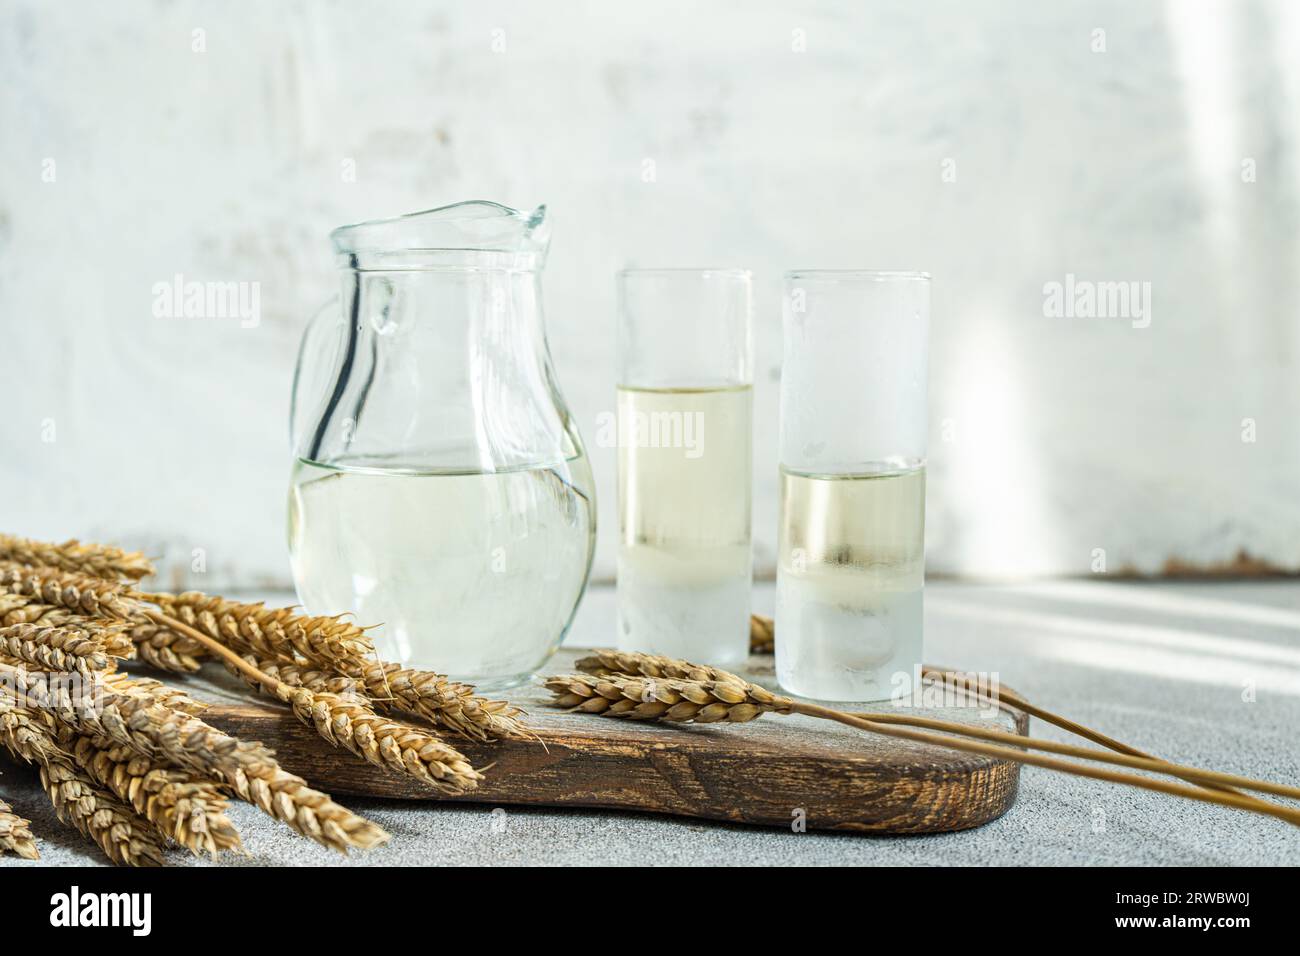 Traditional Ukrainian alcoholic drink made from wheat and known as Gorilka served in transparent jar and glasses placed on cutting board against blurr Stock Photo